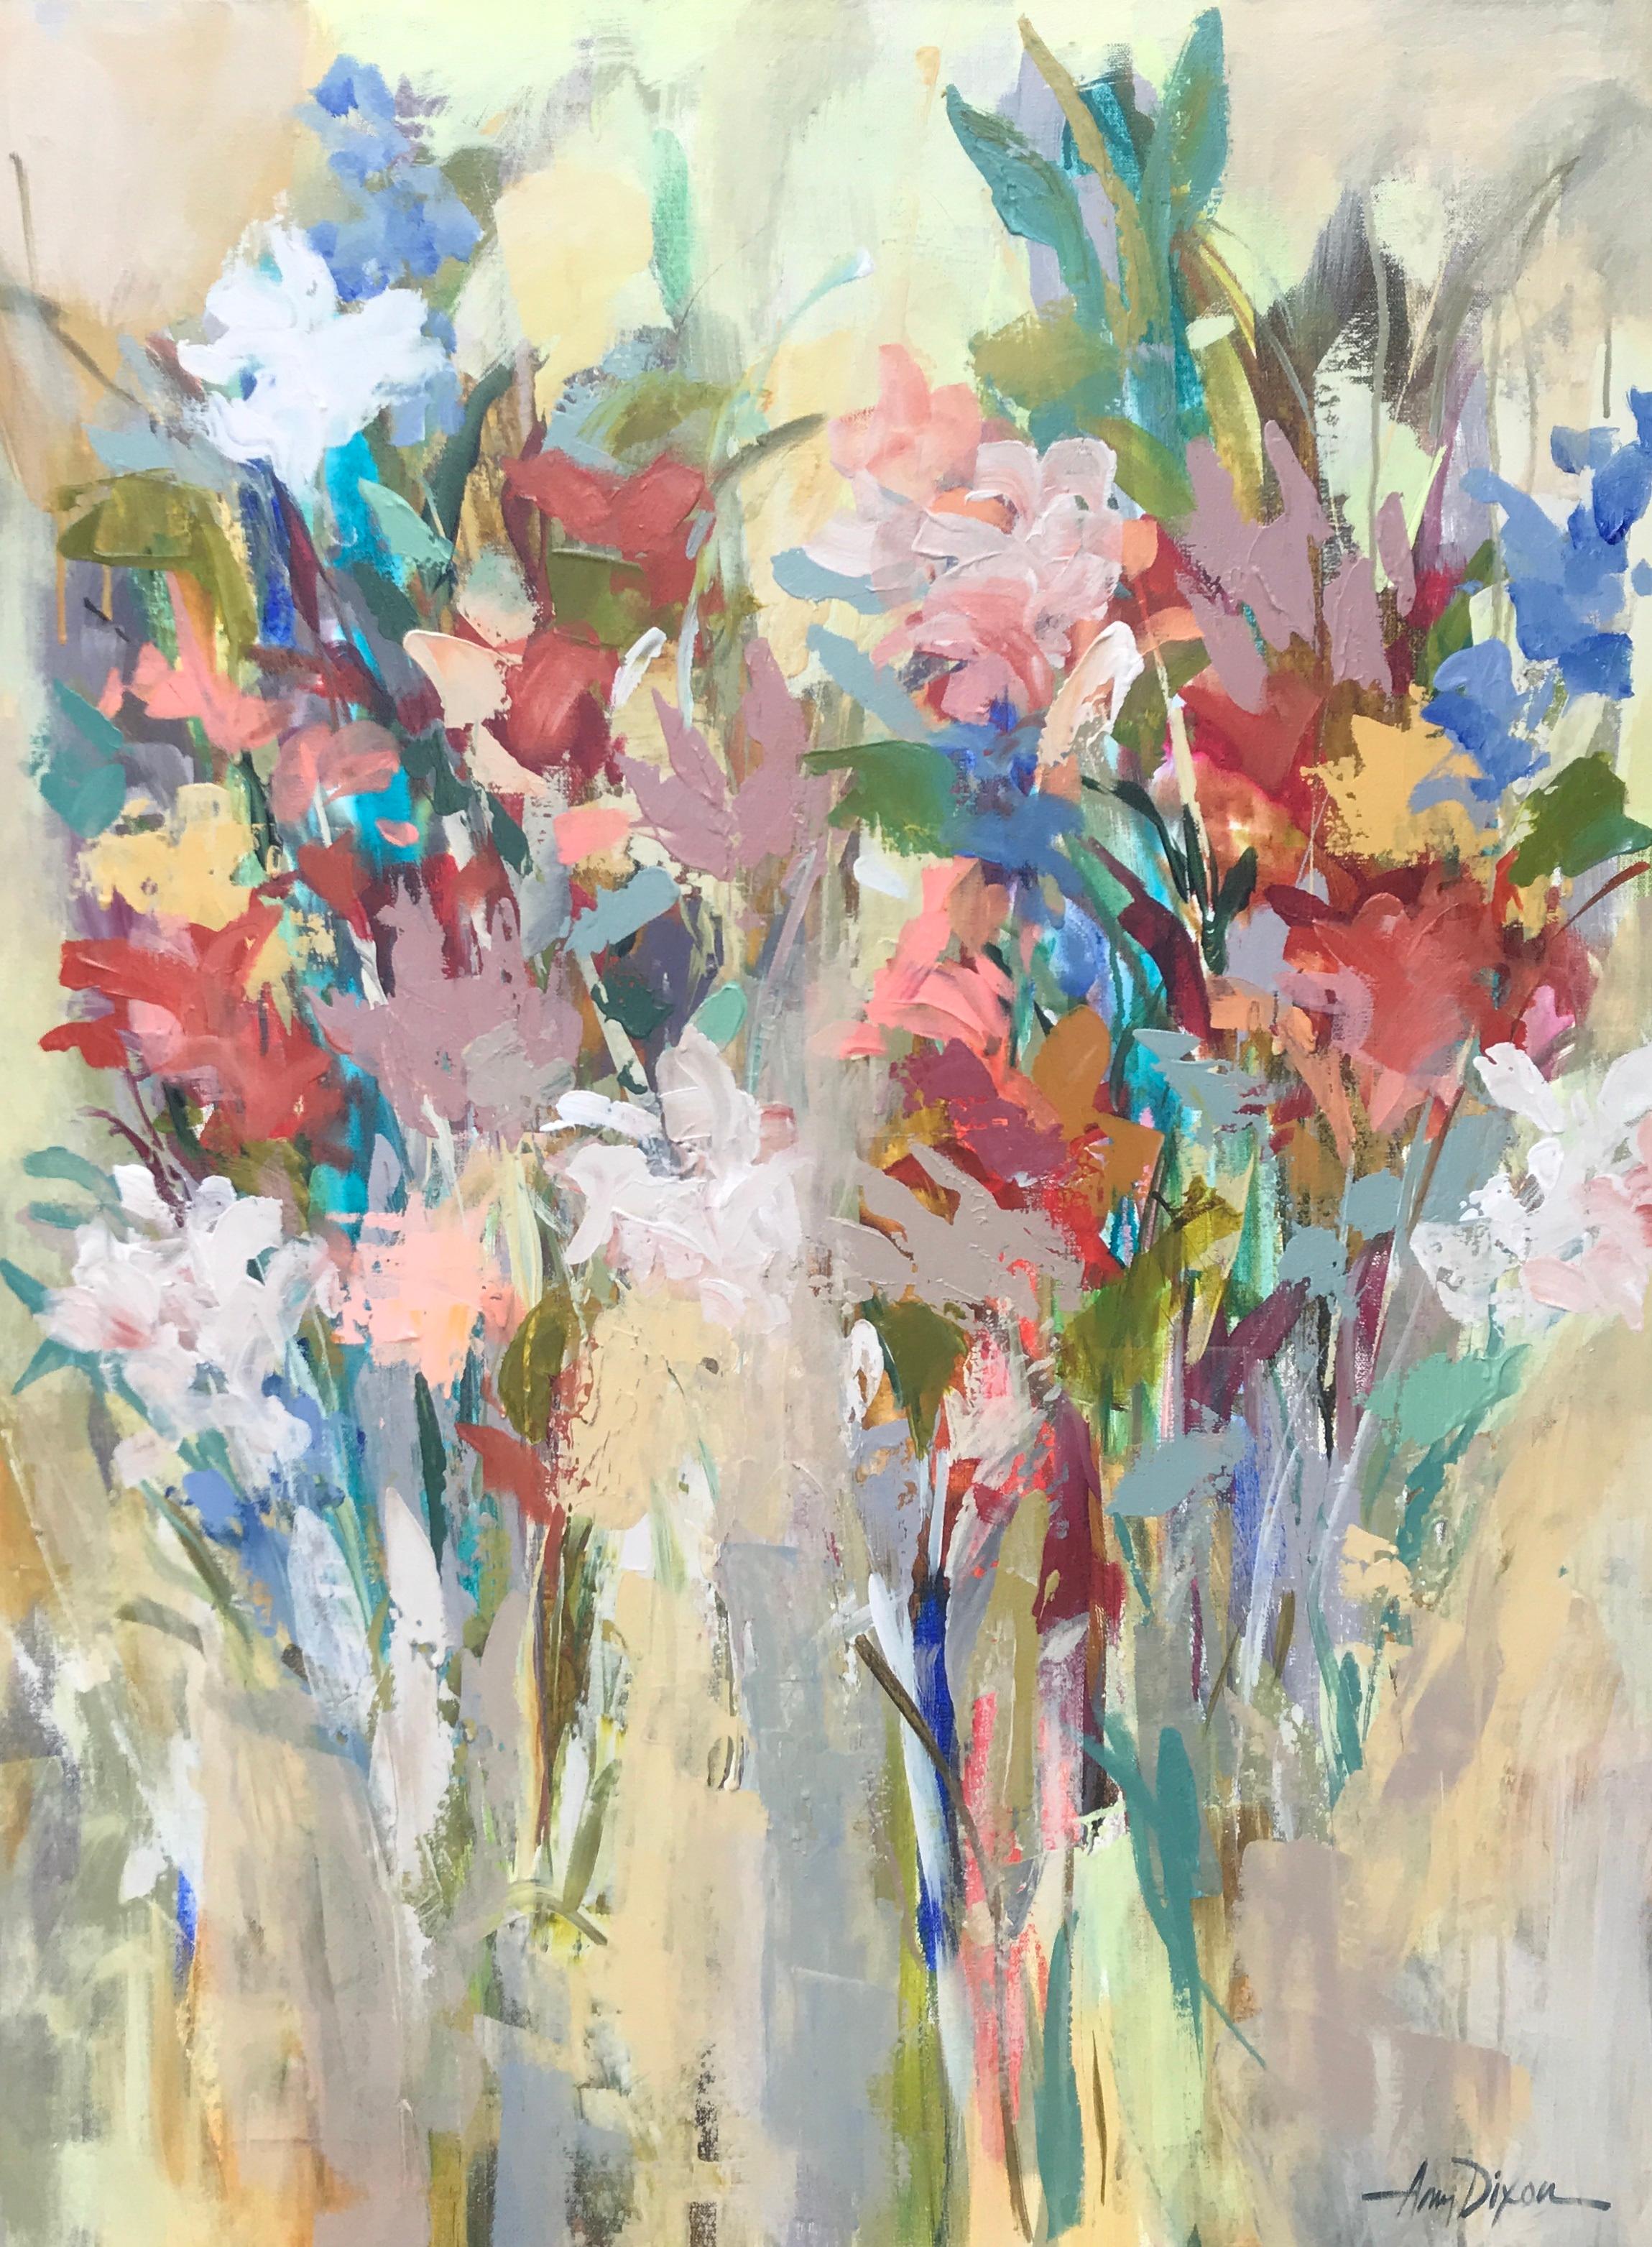 'Fleurs de Marché' is a 2018 floral still-life acrylic on canvas painting created by American artist Amy Dixon. Featuring a vibrant depiction of a bouquet of flowers that was purchased on a French outdoors market, the painting exudes a contagious